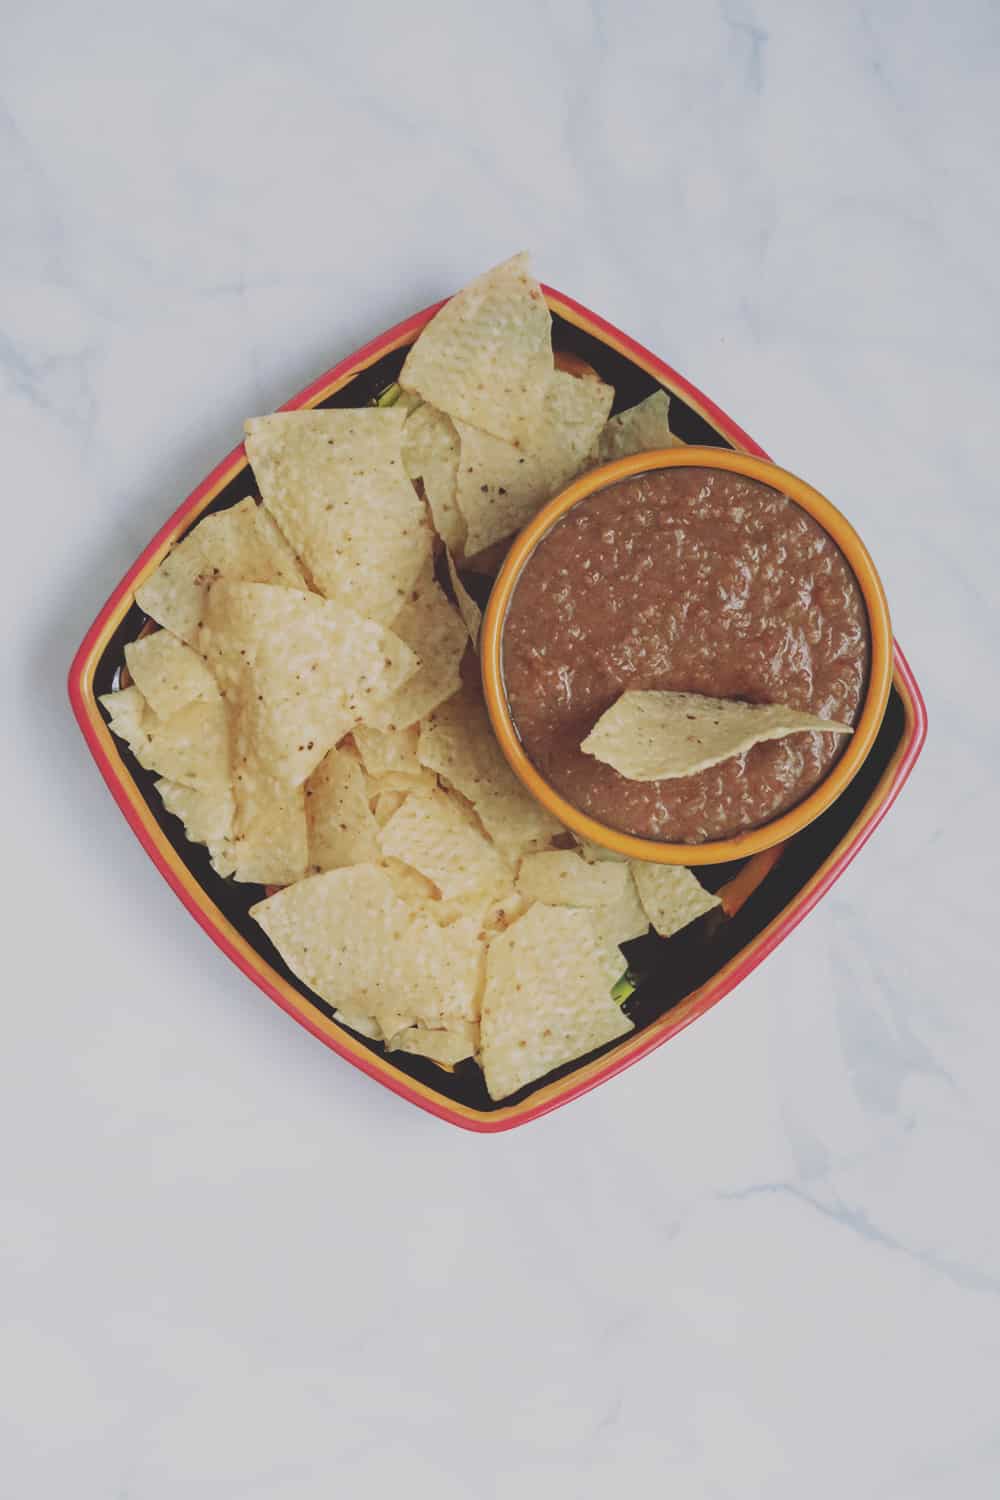 This simple slow cooker bean dip is perfect for game day snacking. Just a few ingredients and hours later you've got a deliciously easy dish!